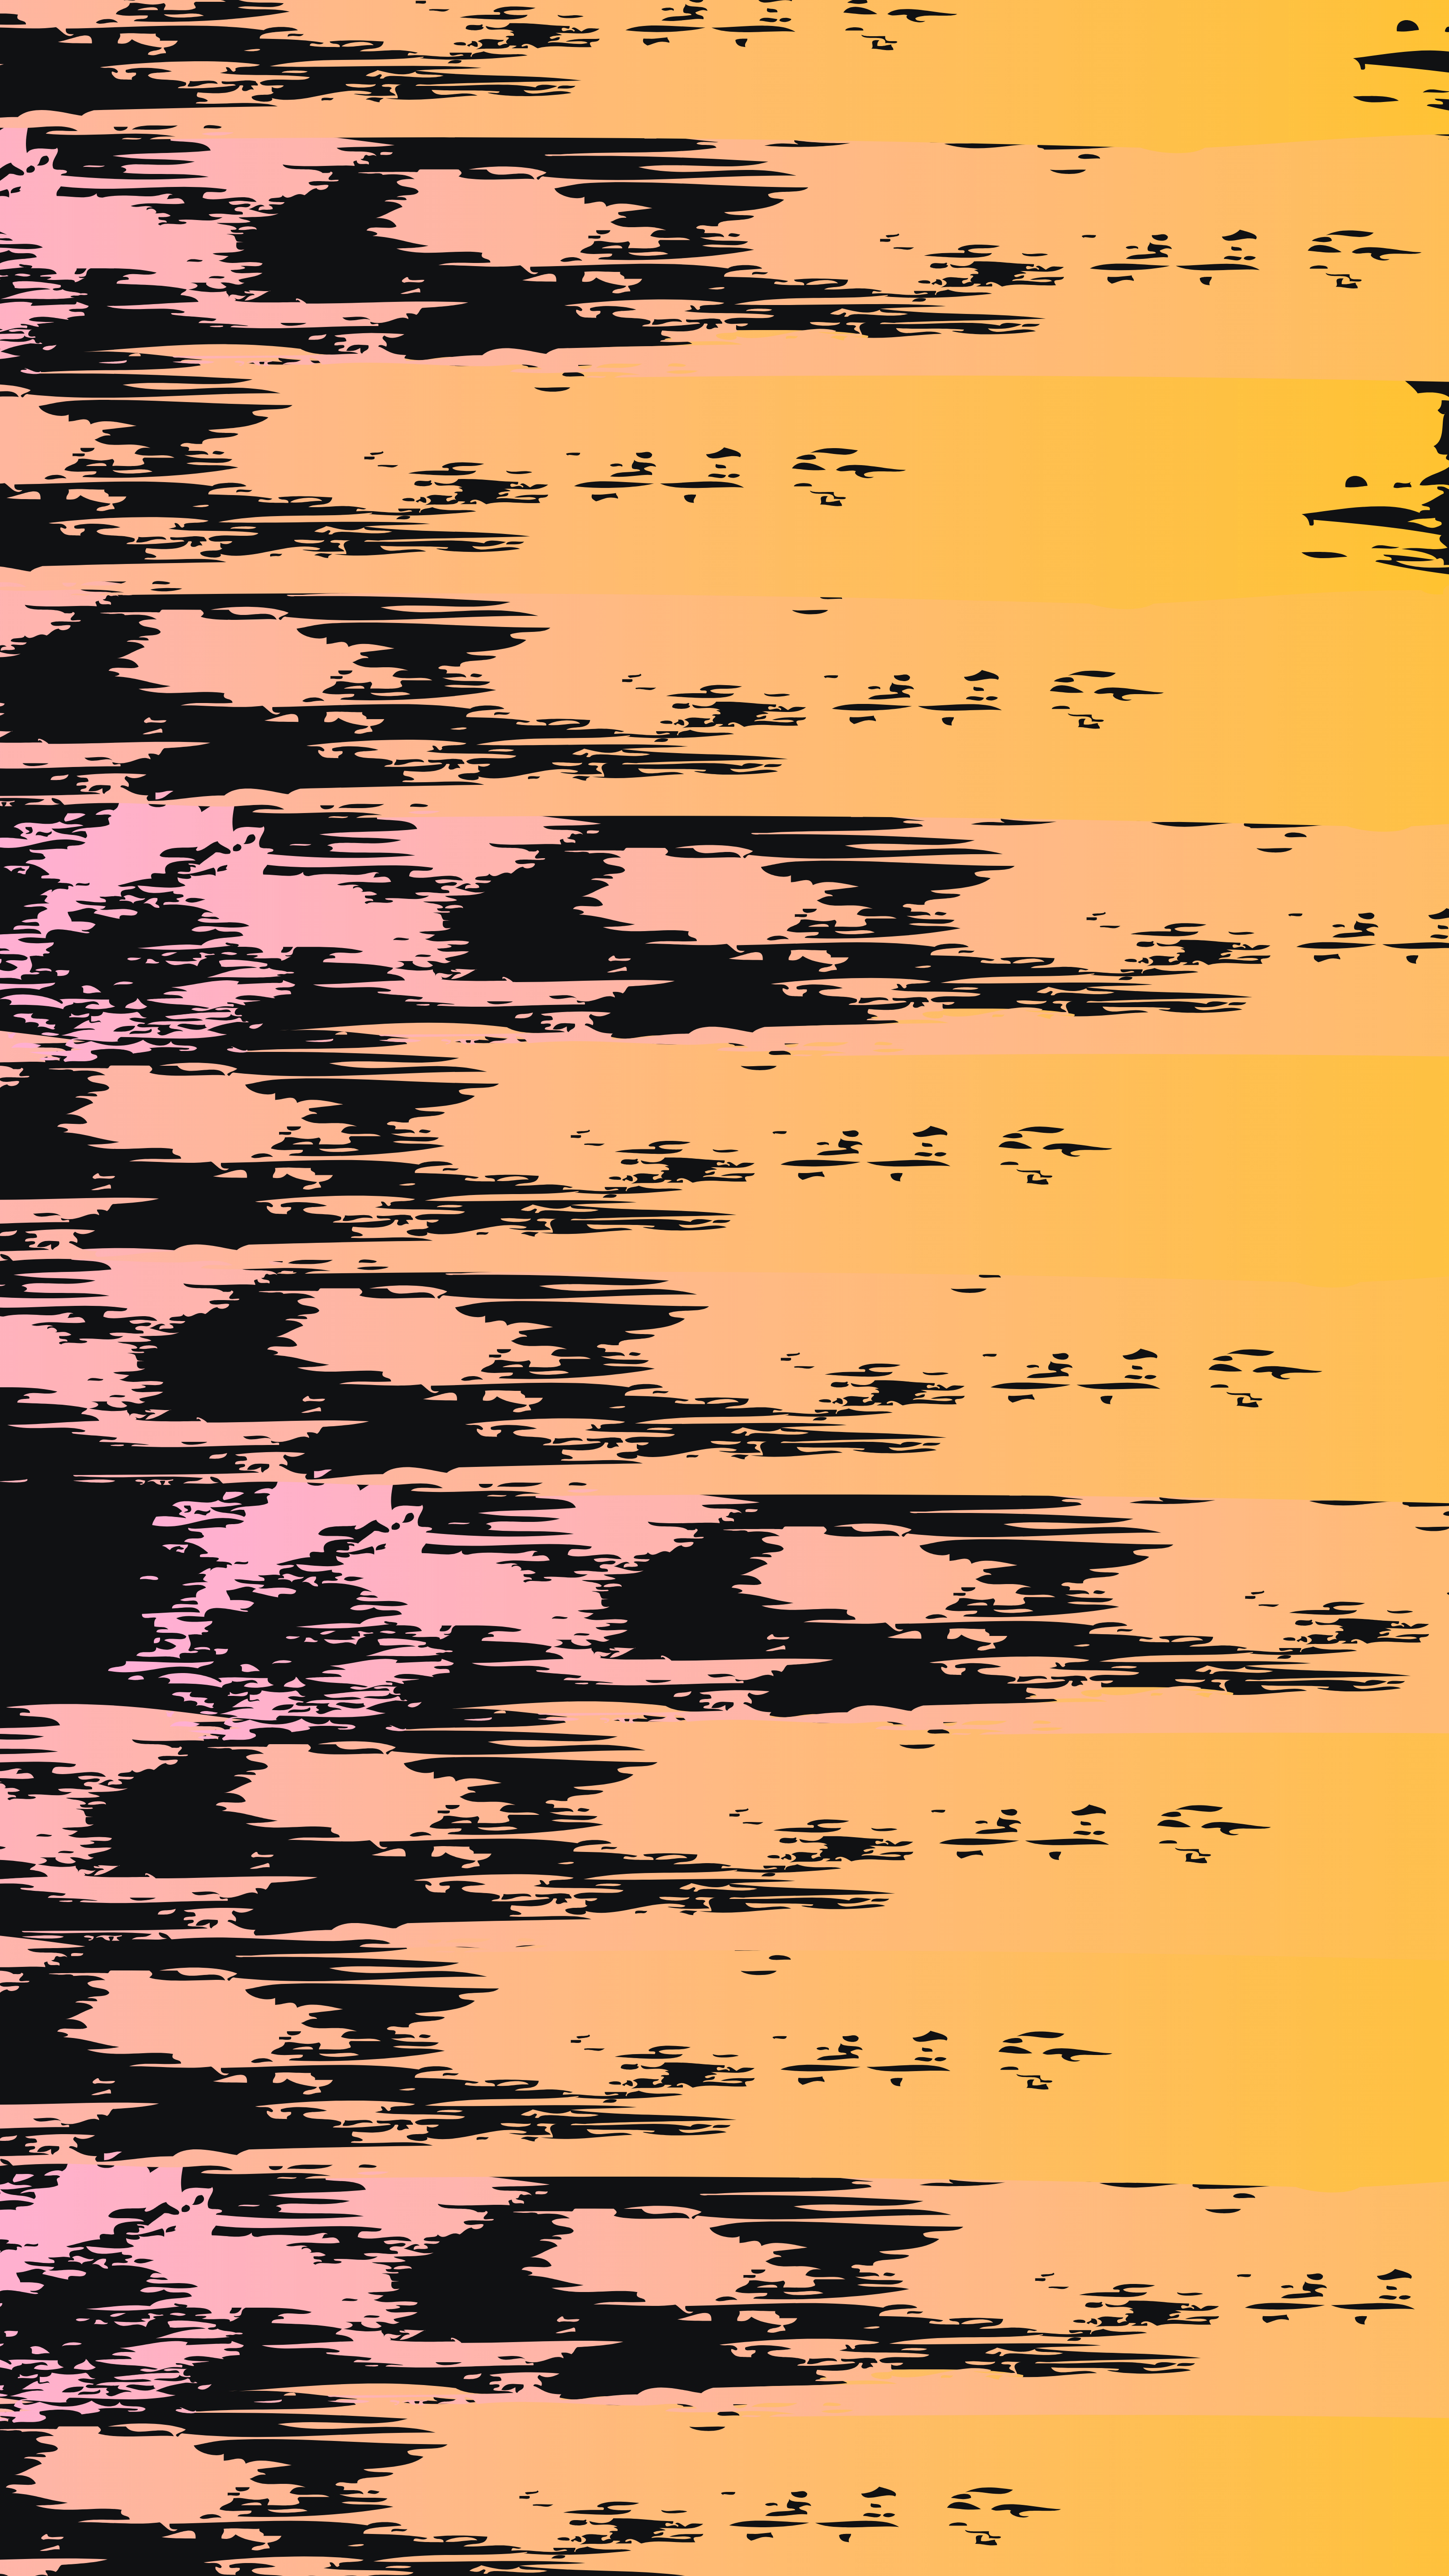 glitch, abstract, stains, spots, distortion, noise